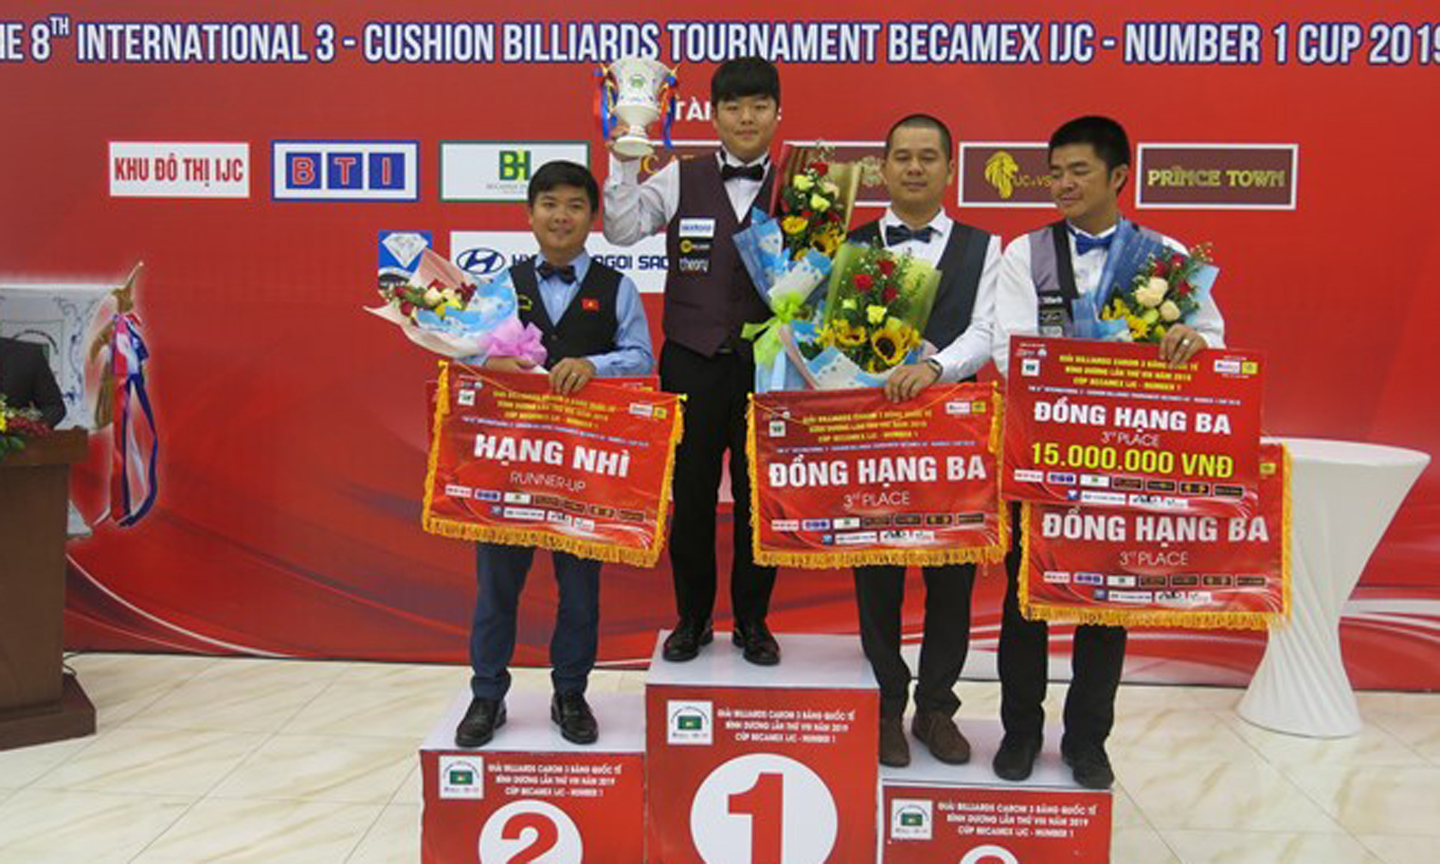 Top players of International three-Cushion Billiards Tournament - Becamex IJC – Number 1 Cup (Source: VNA)